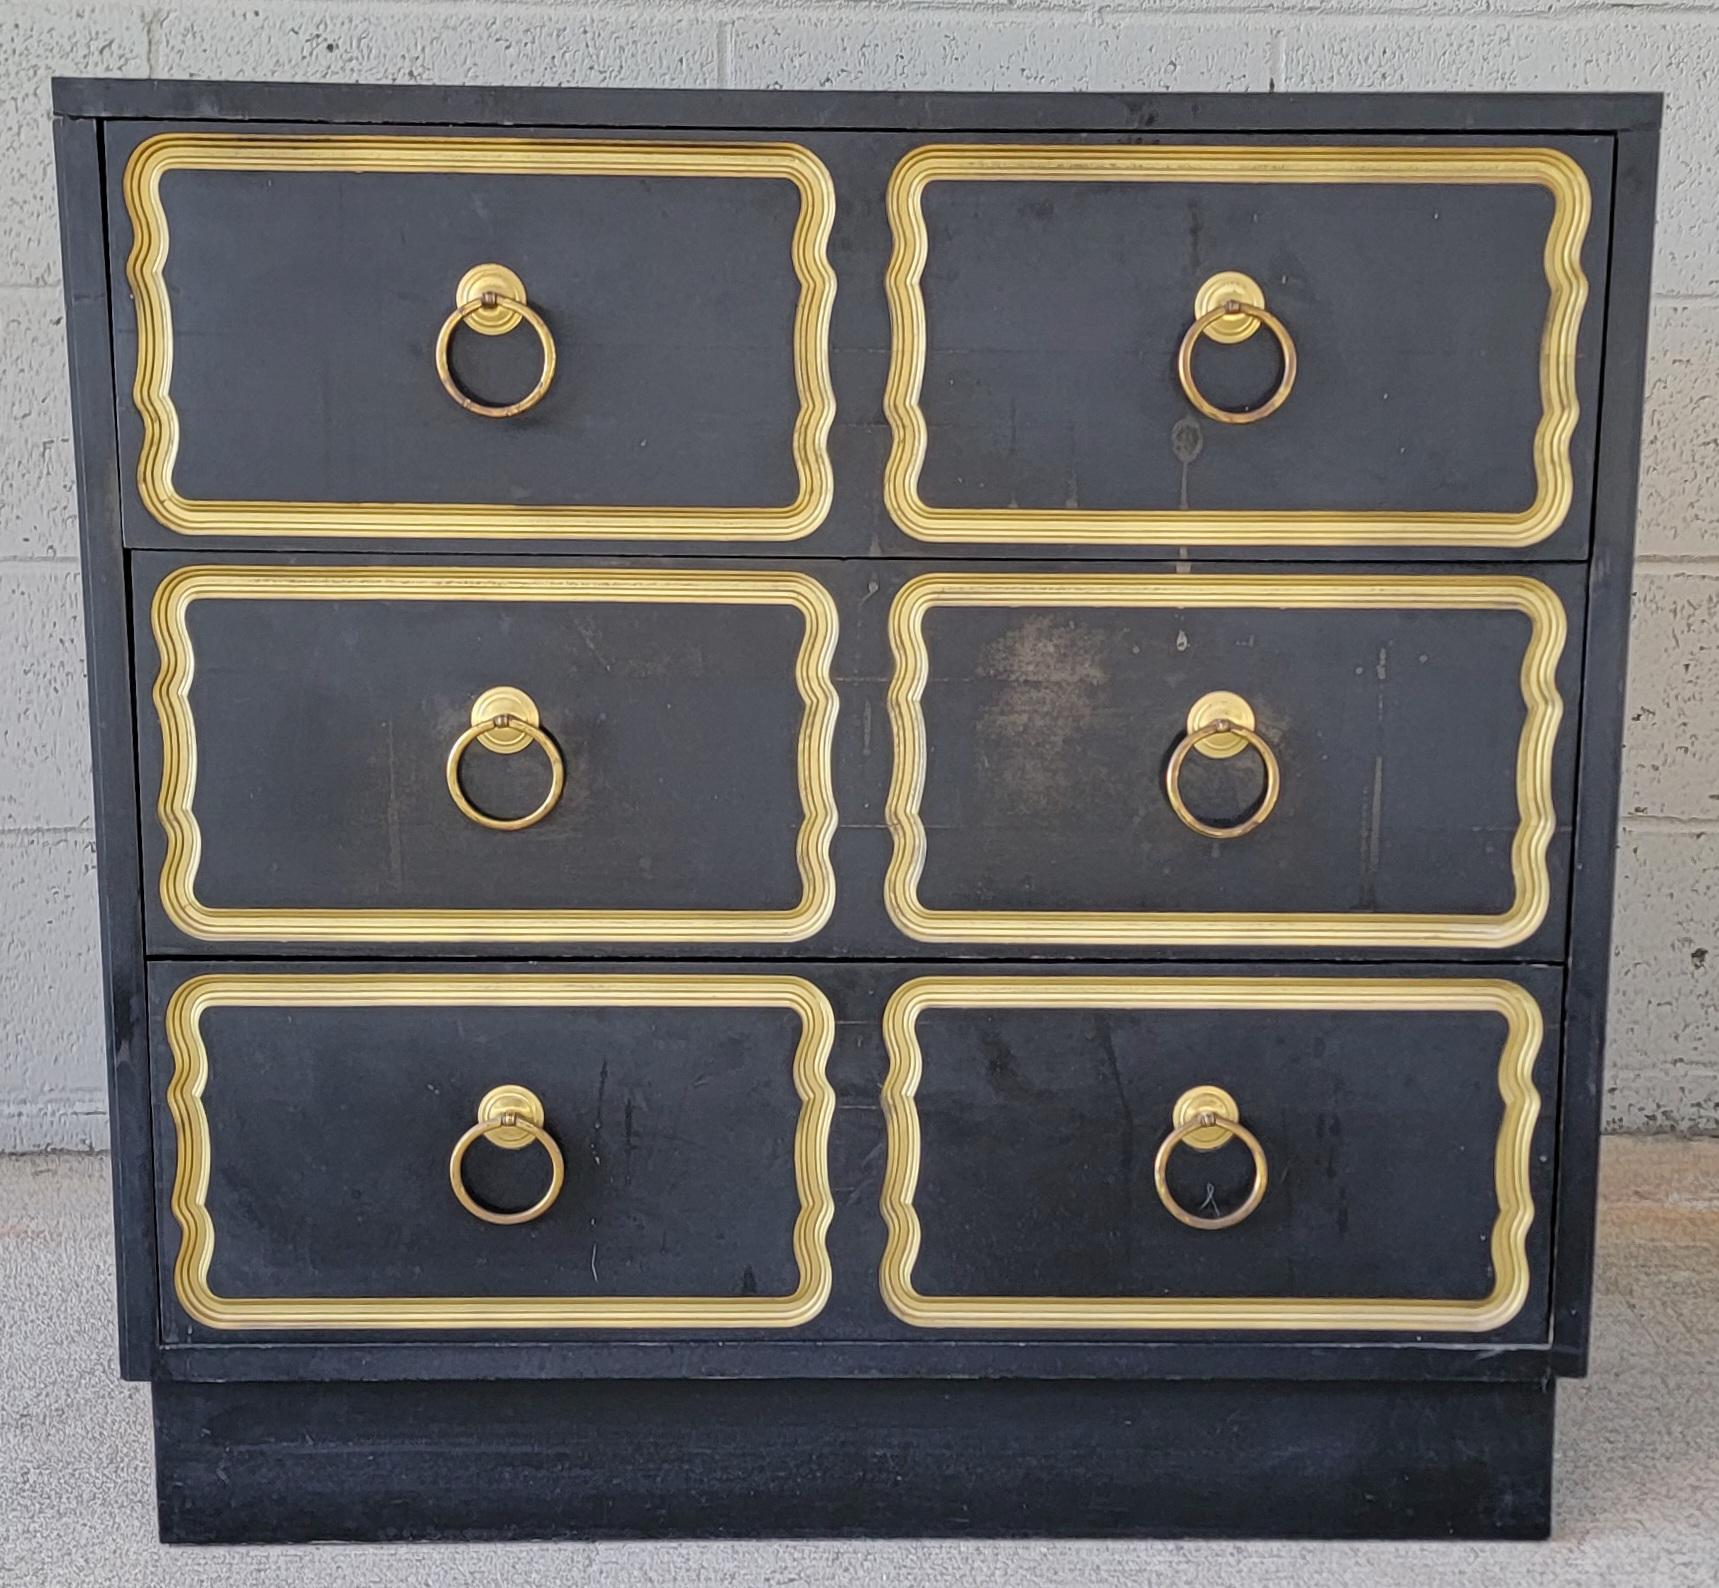 Chest of drawers attributed to Dorothy Draper. Three drawers with dovetail construction. Original black and gold painted finish. Original hardware. Wear from age and use. If a pair is desired, we have the matching chest posted.